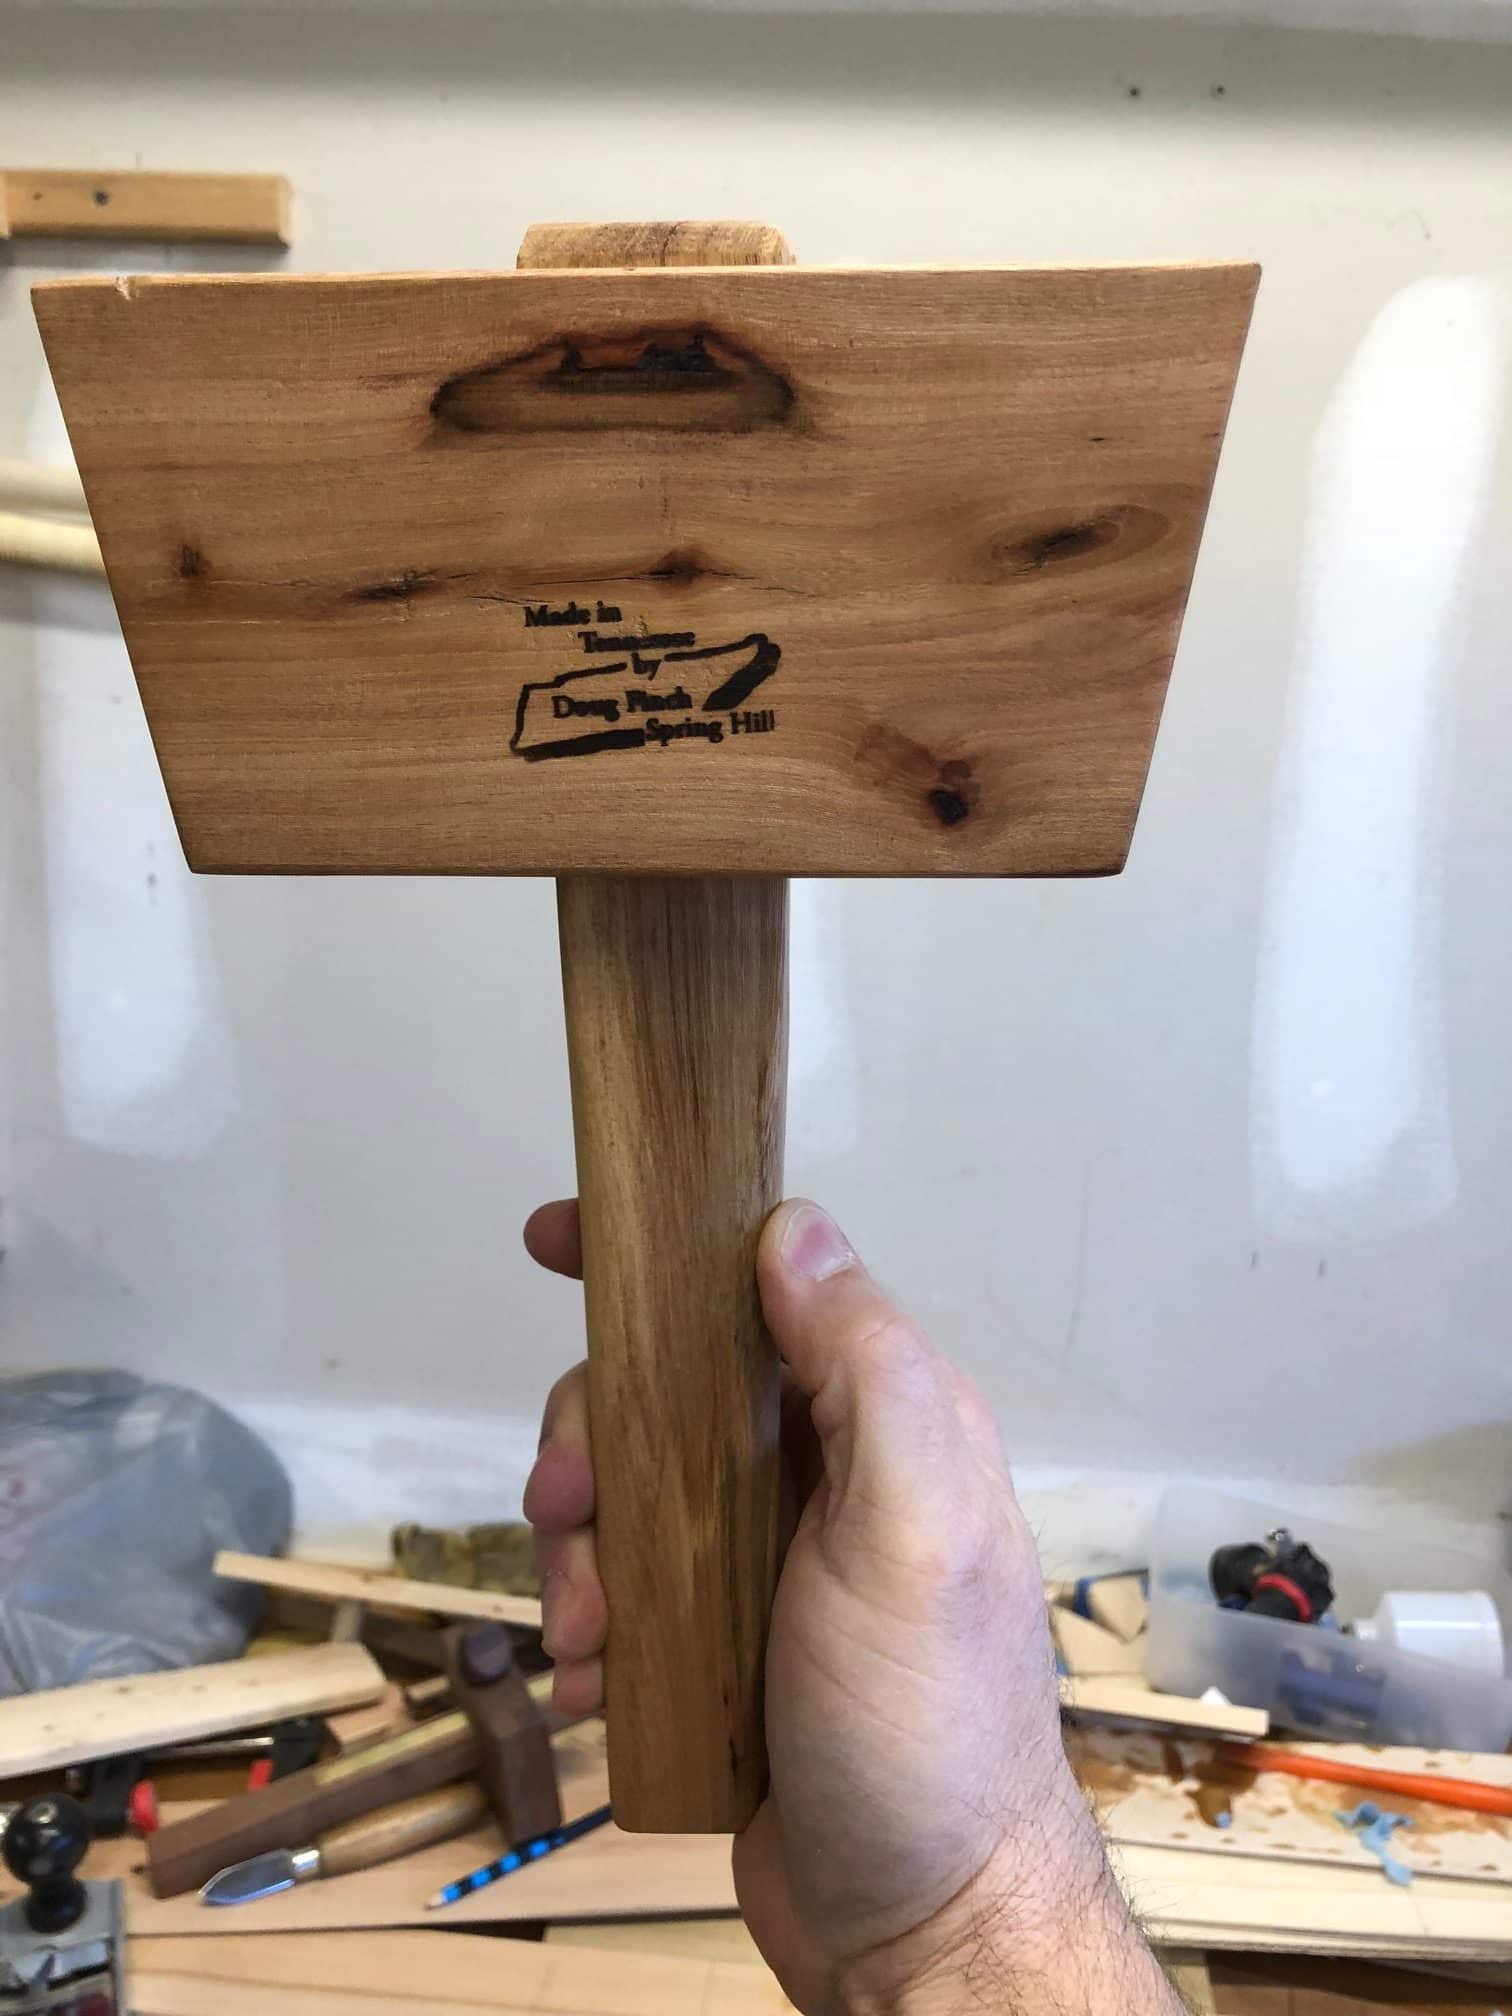 Joiner's Mallet by Doug Finch